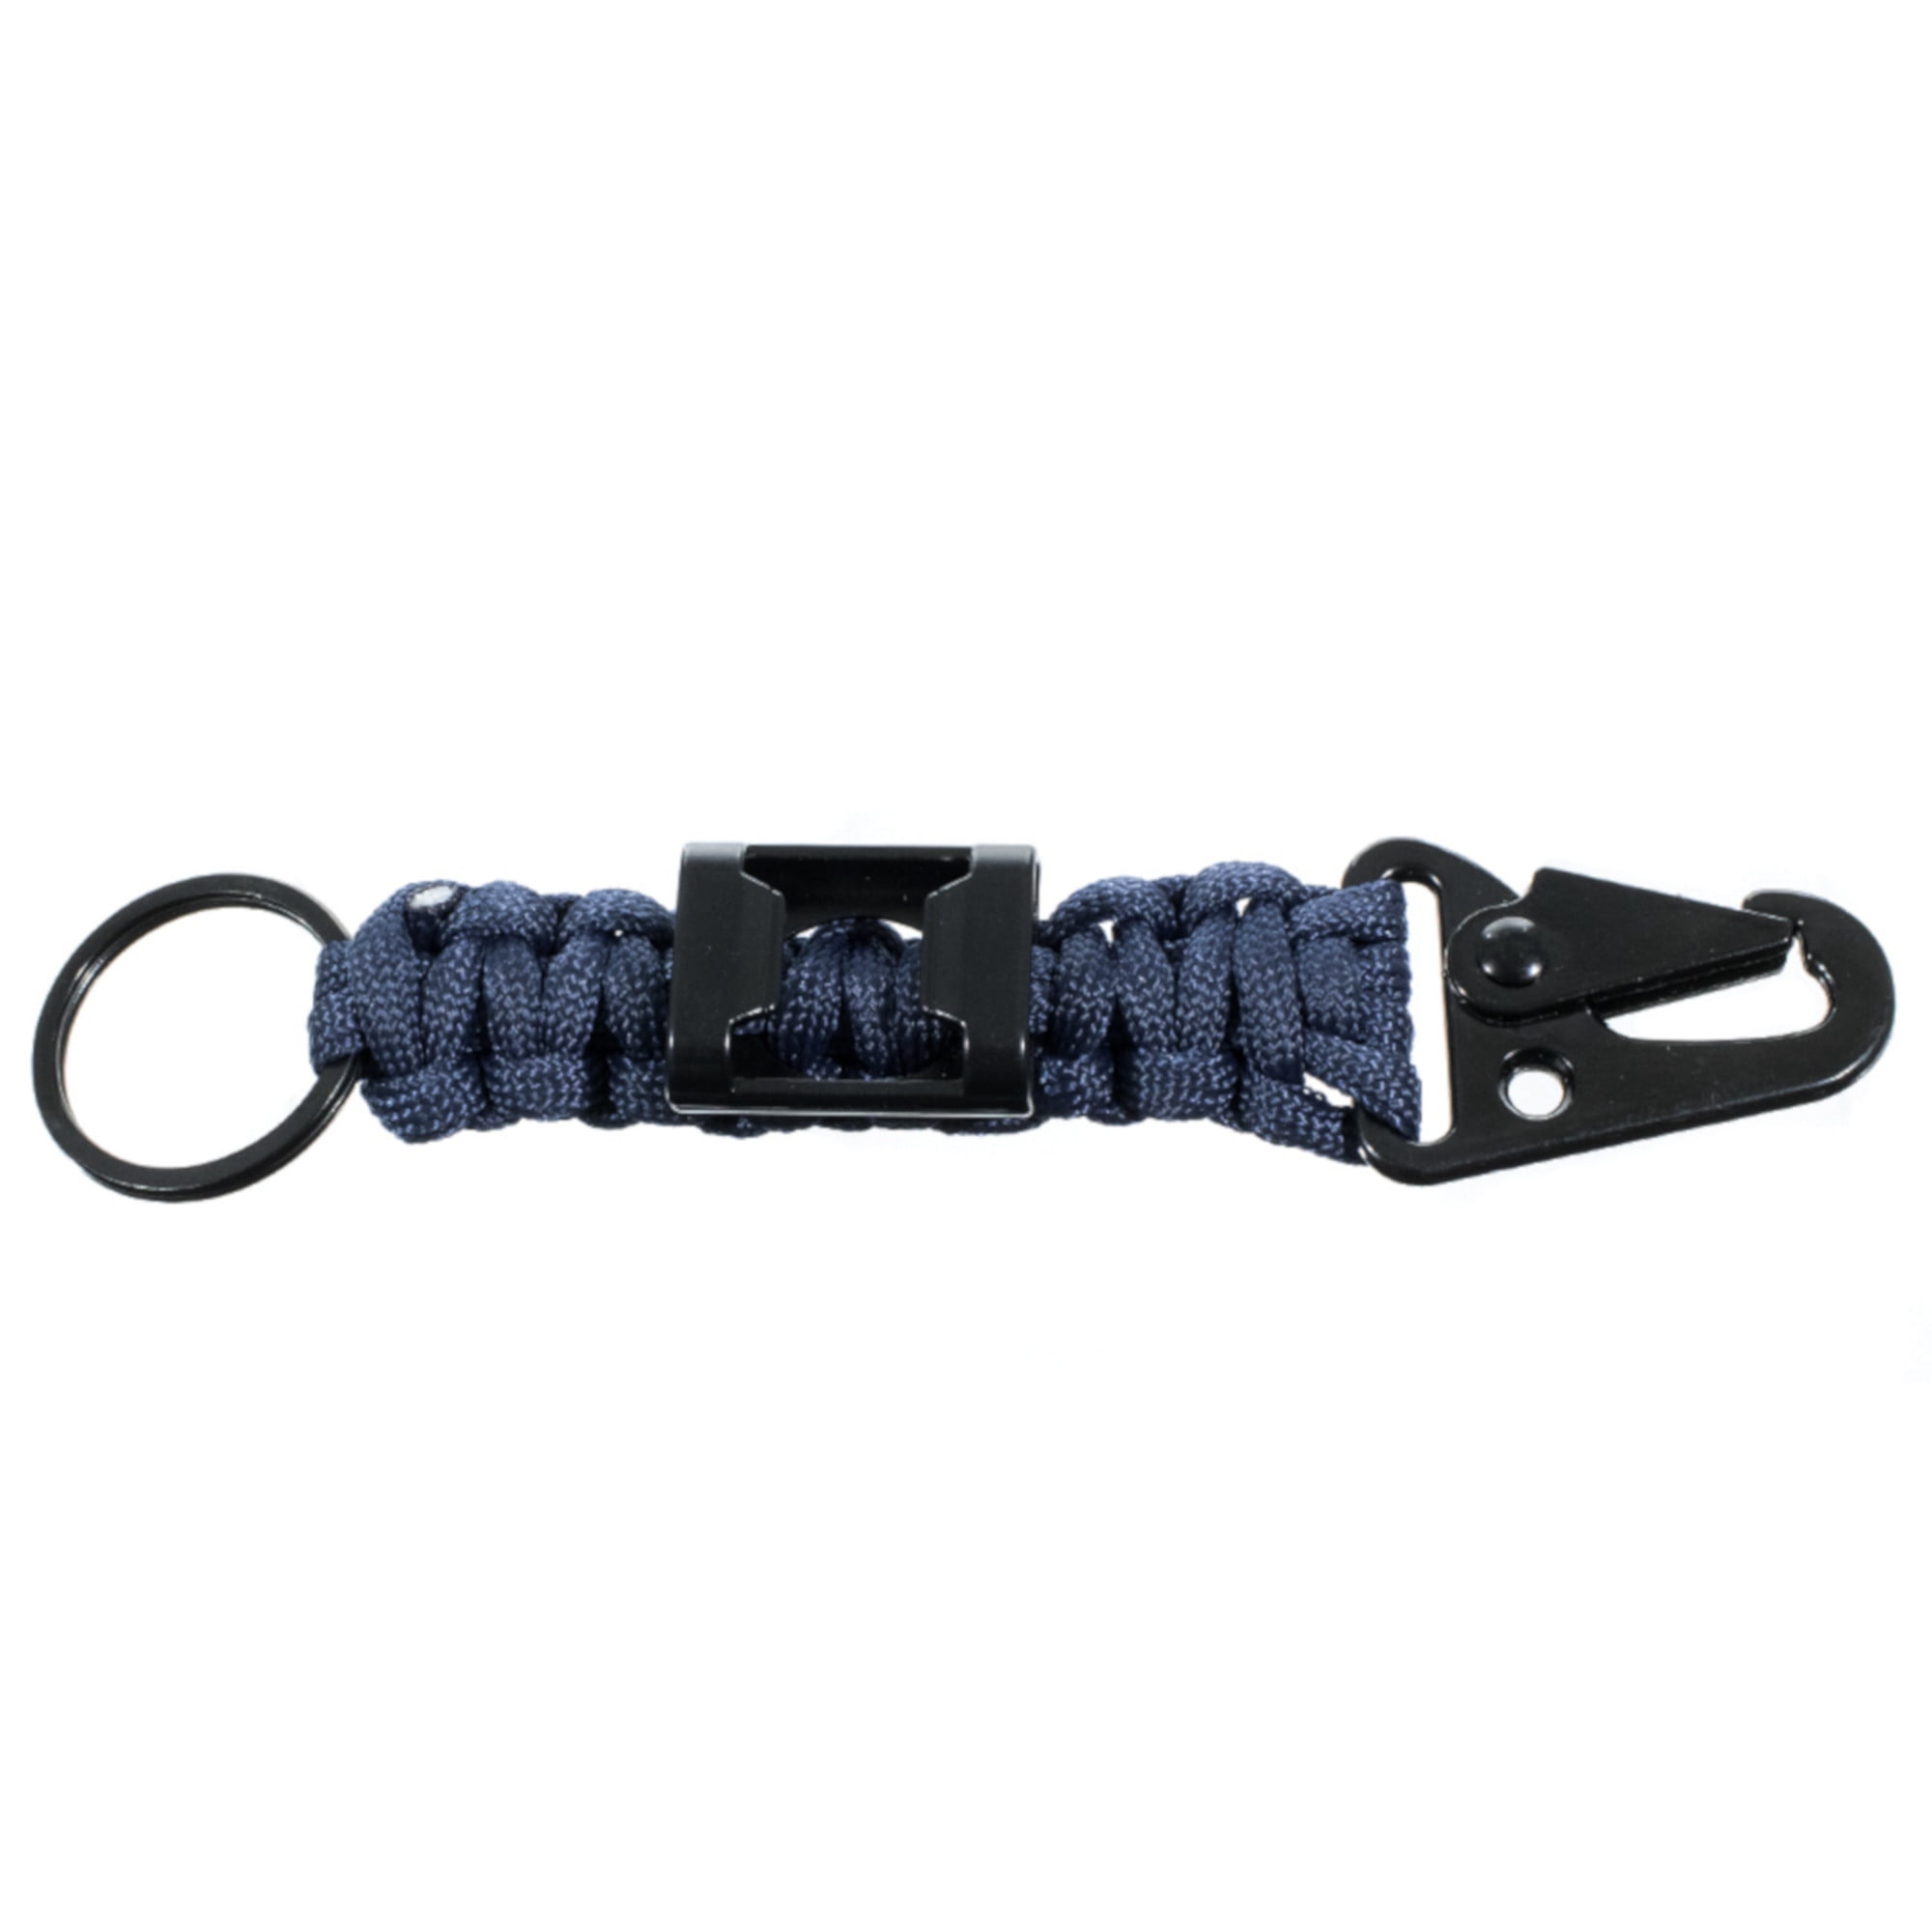 Utility Series Utility Tactical Carabiner with Paracord, Black and Tan 